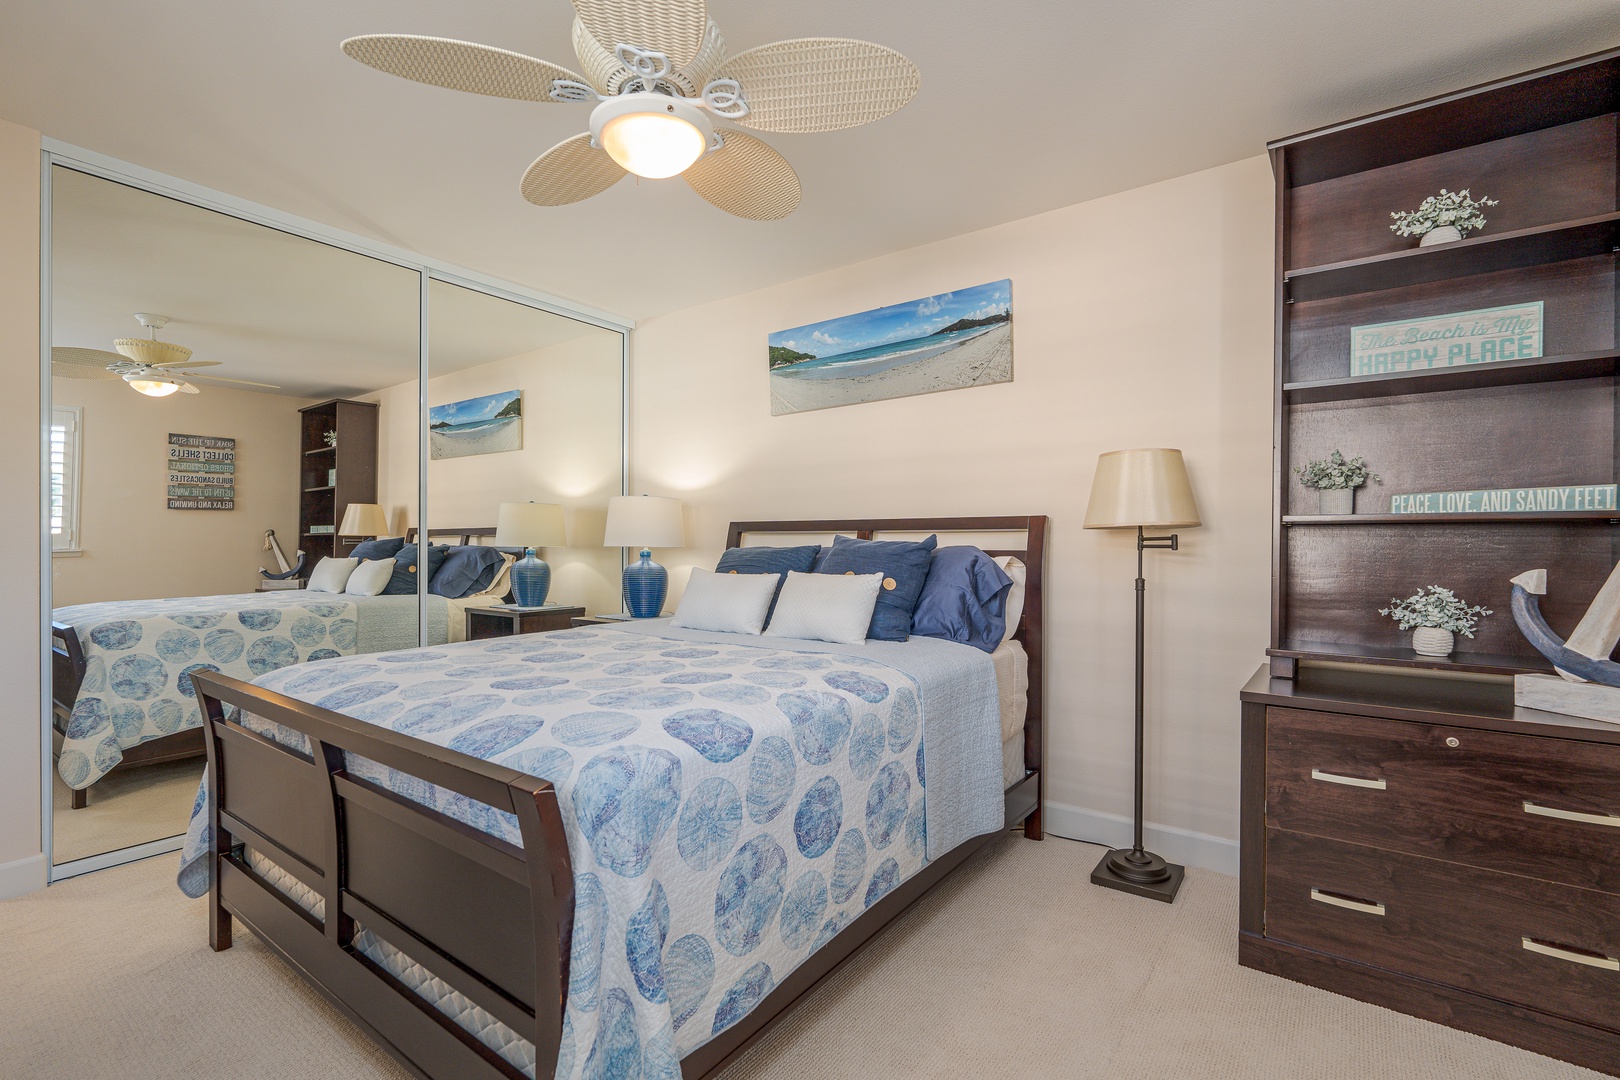 Kapolei Vacation Rentals, Ko Olina Kai 1097C - The guest bedroom comes with a large mirror closet.